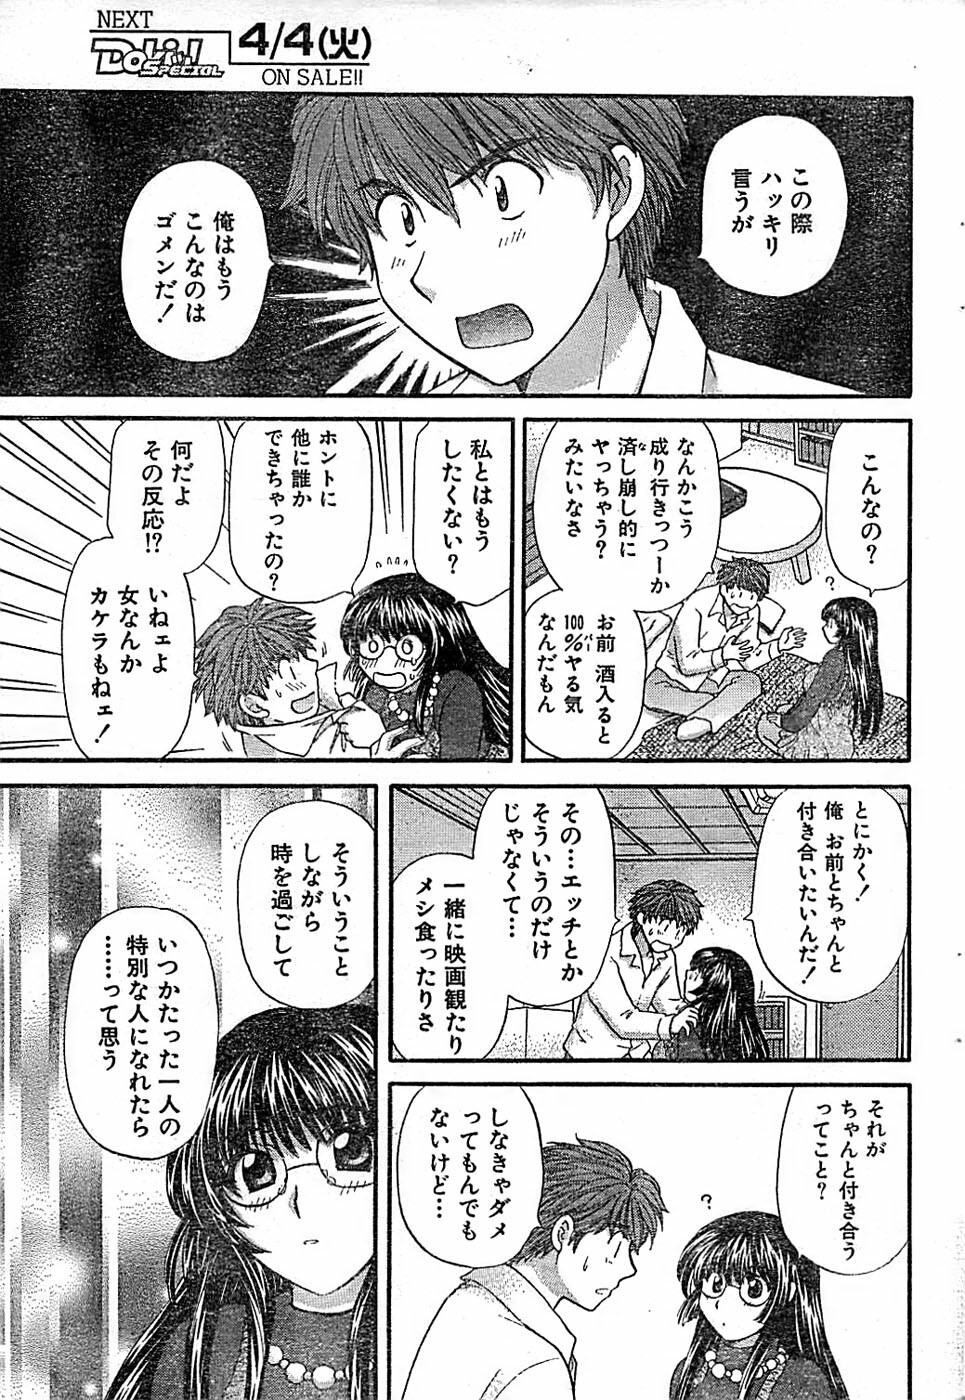 Doki! Special 2006-04 page 41 full